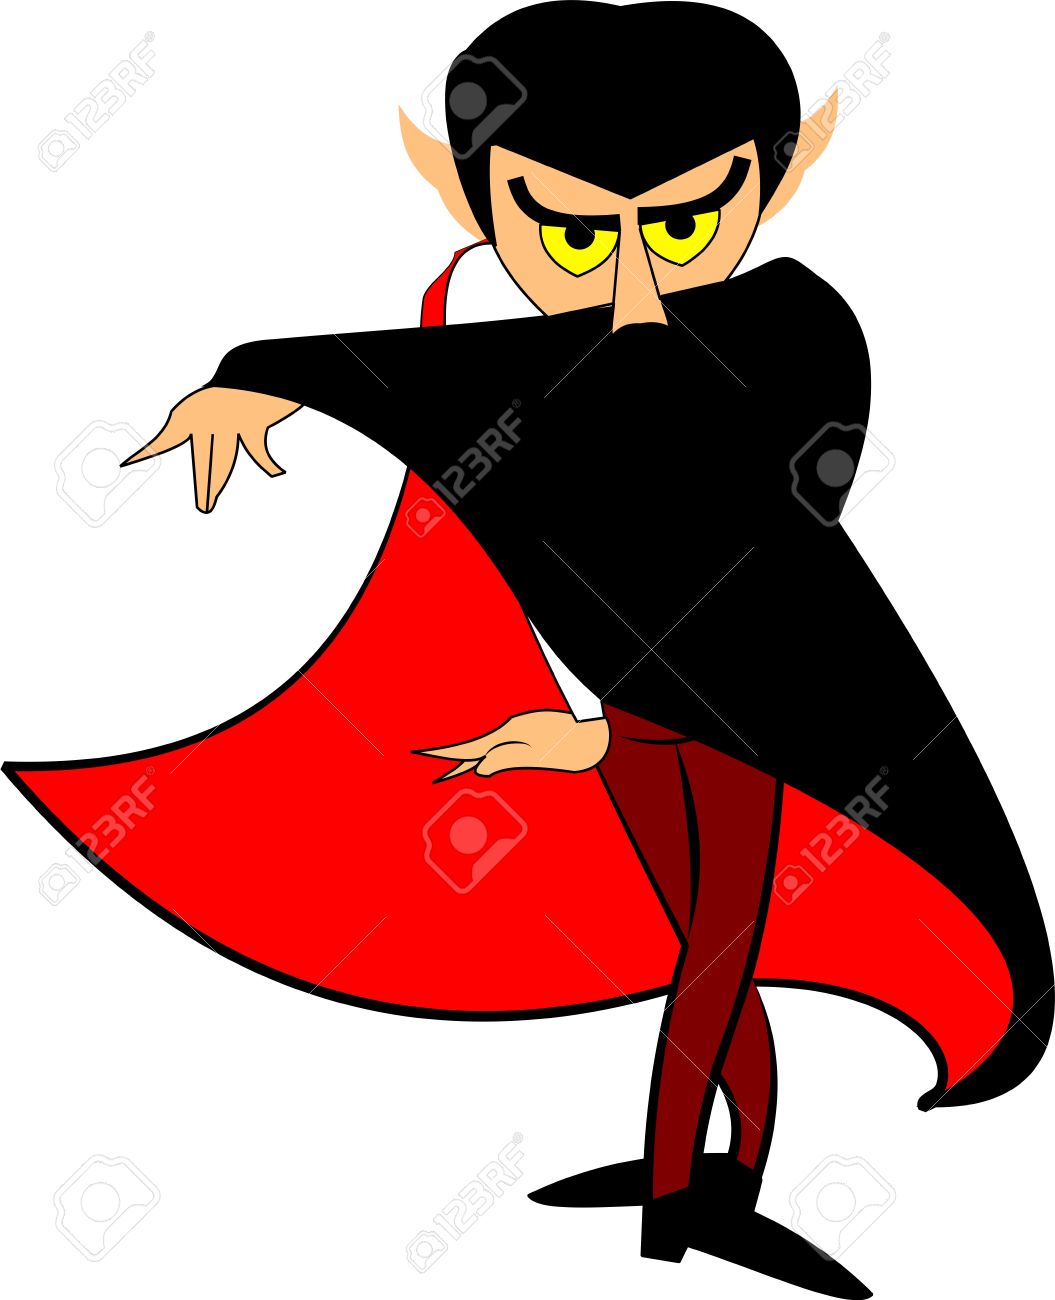 Free download best on. Dracula clipart vampire cape